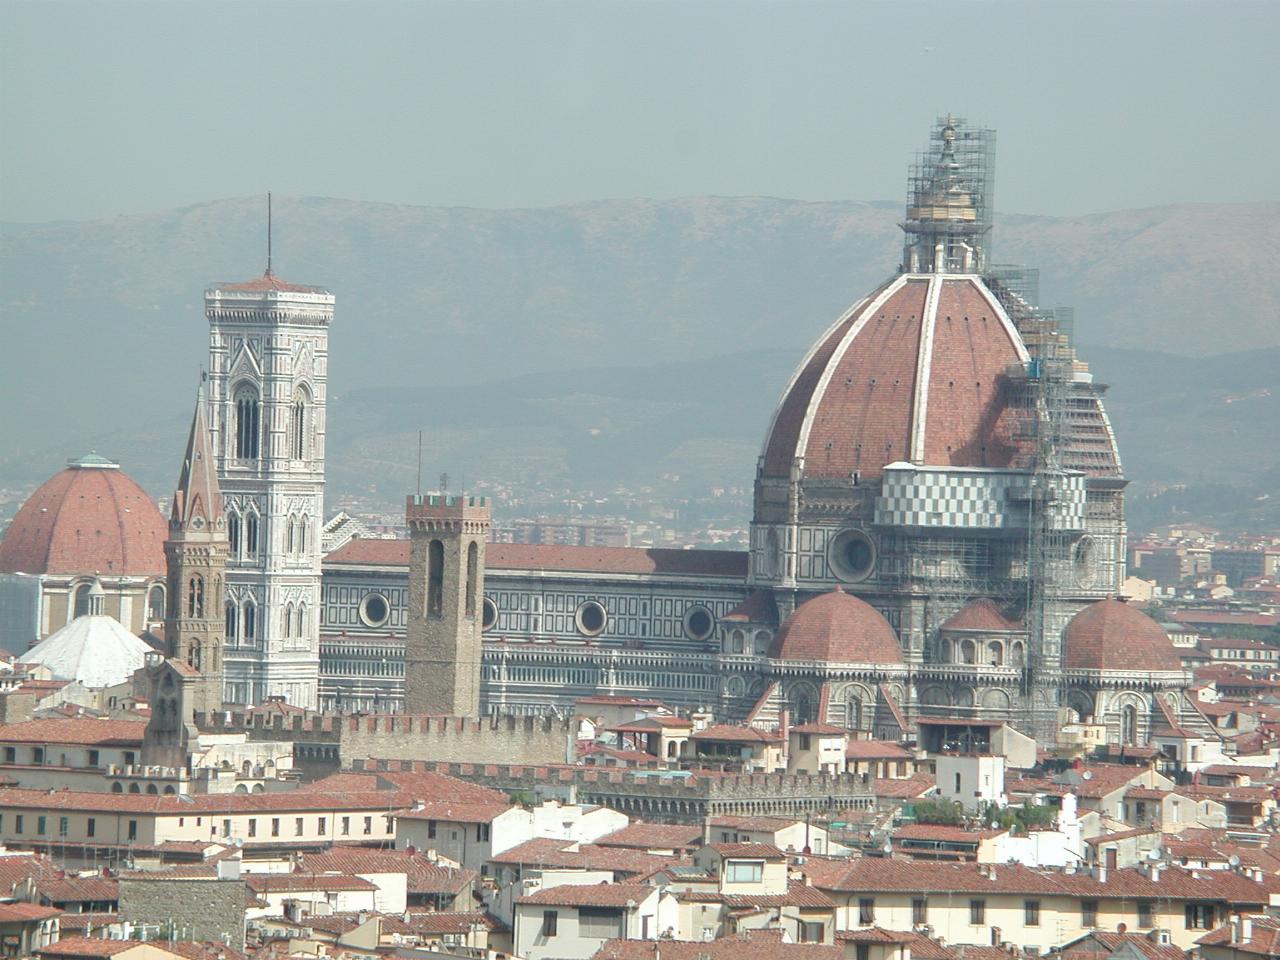 Duomo, Campanile and Baptistry from Piazzale Michelangelo